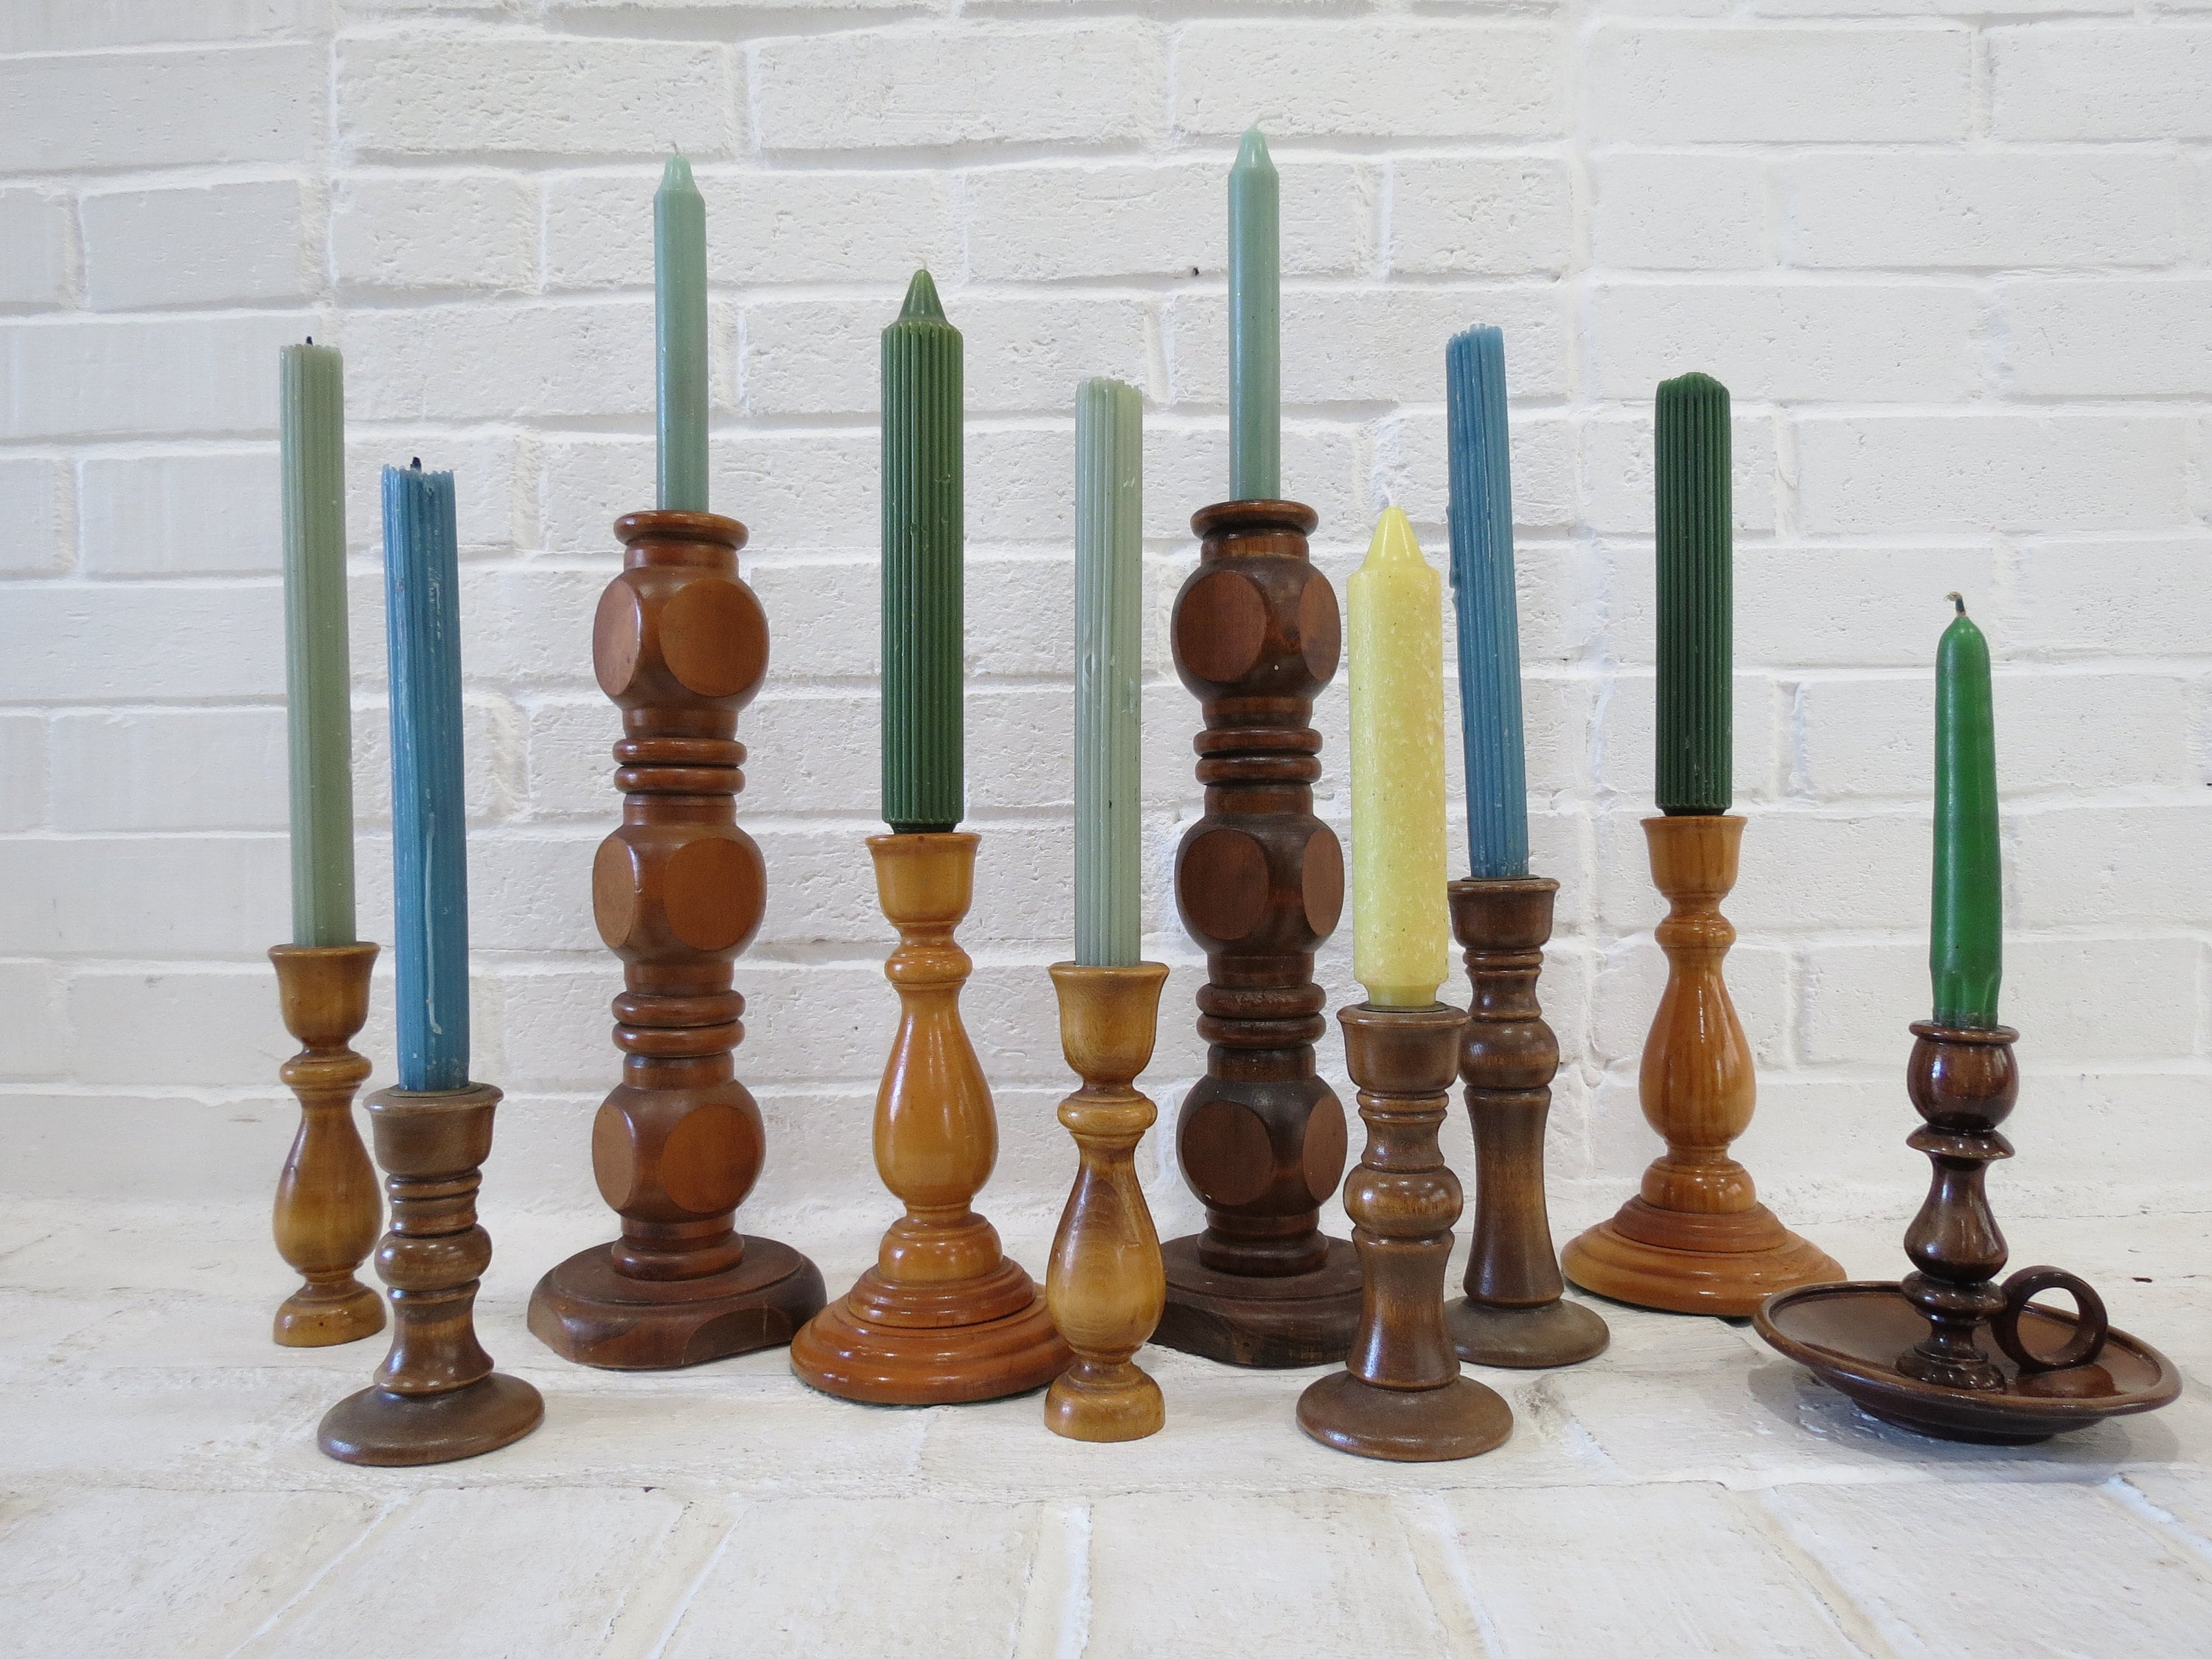 Vintage Wooden Candlesticks Collection // 10 Wooden Candleholders